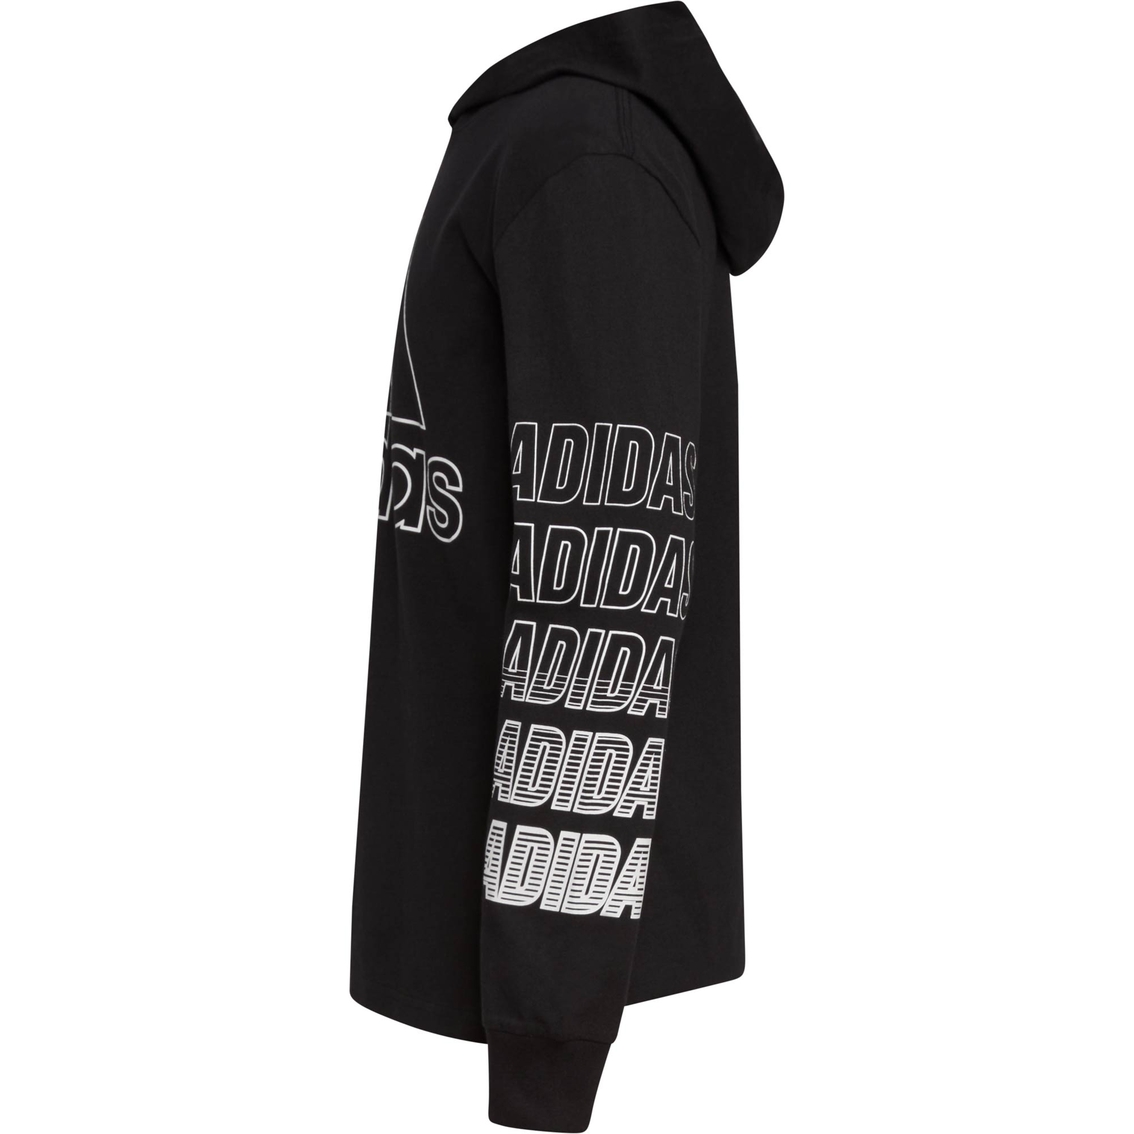 Adidas Toddler Boys Fast Hooded Tee - Image 7 of 7